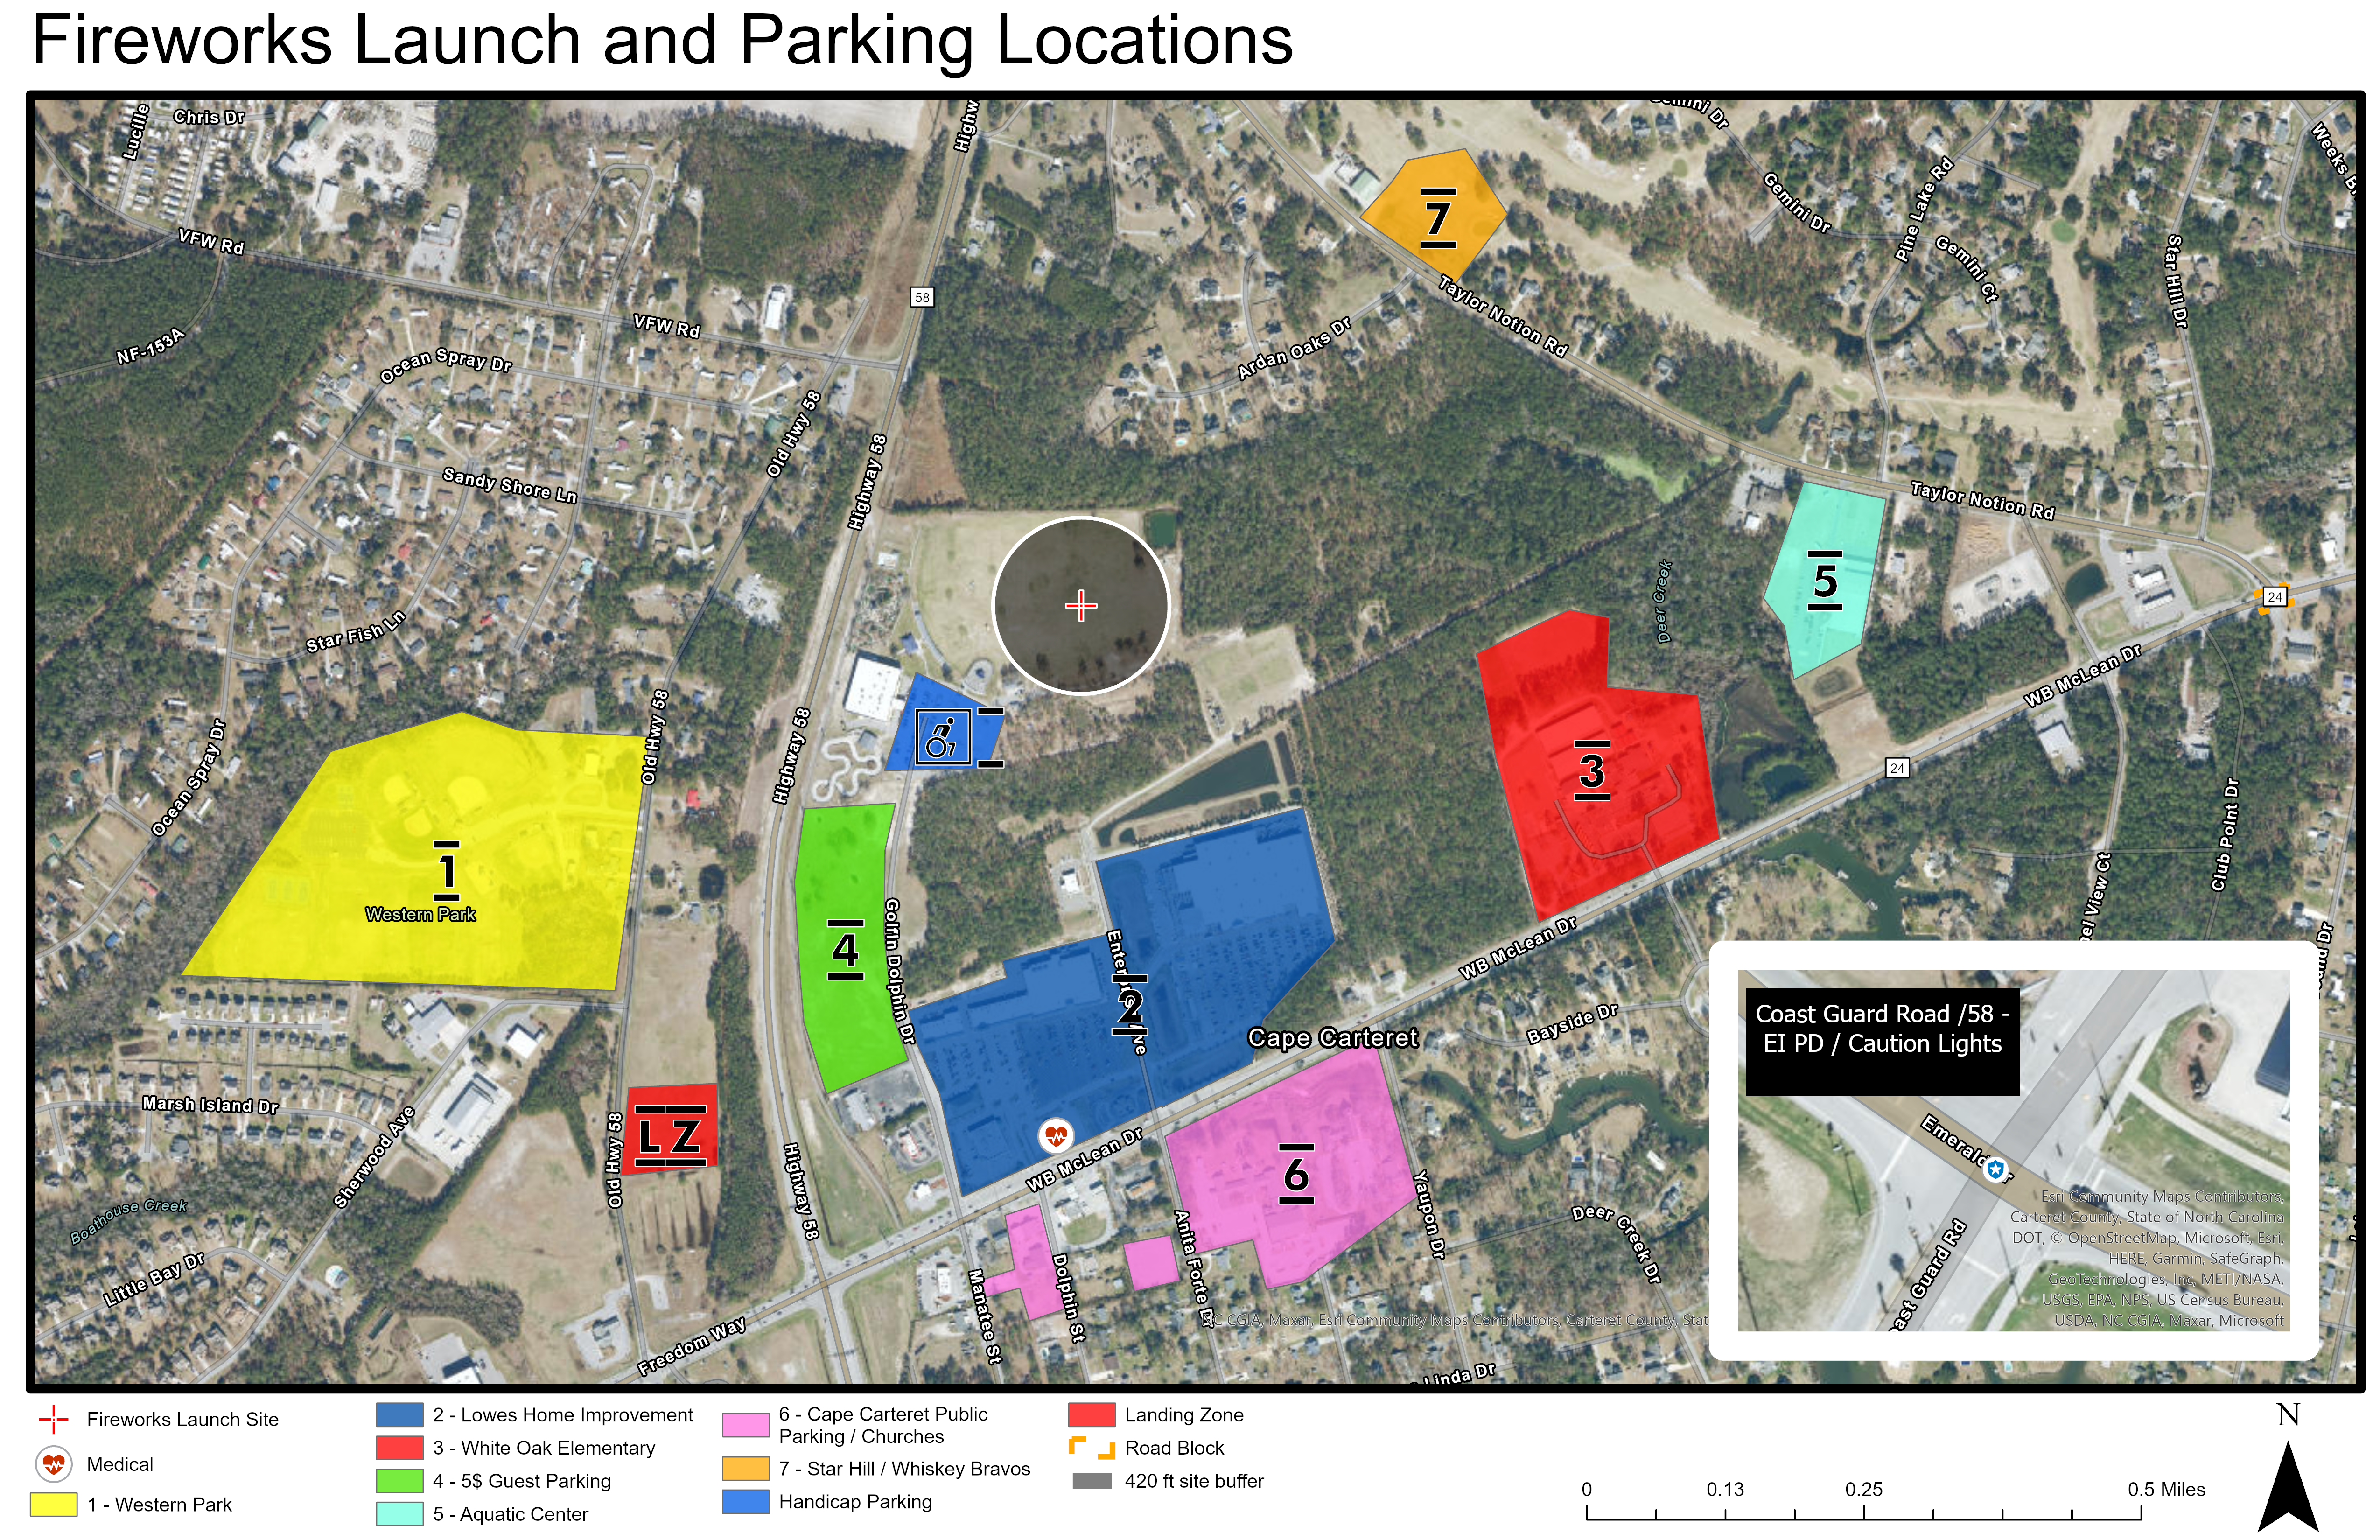 Fireworks Launch and Parking Locations